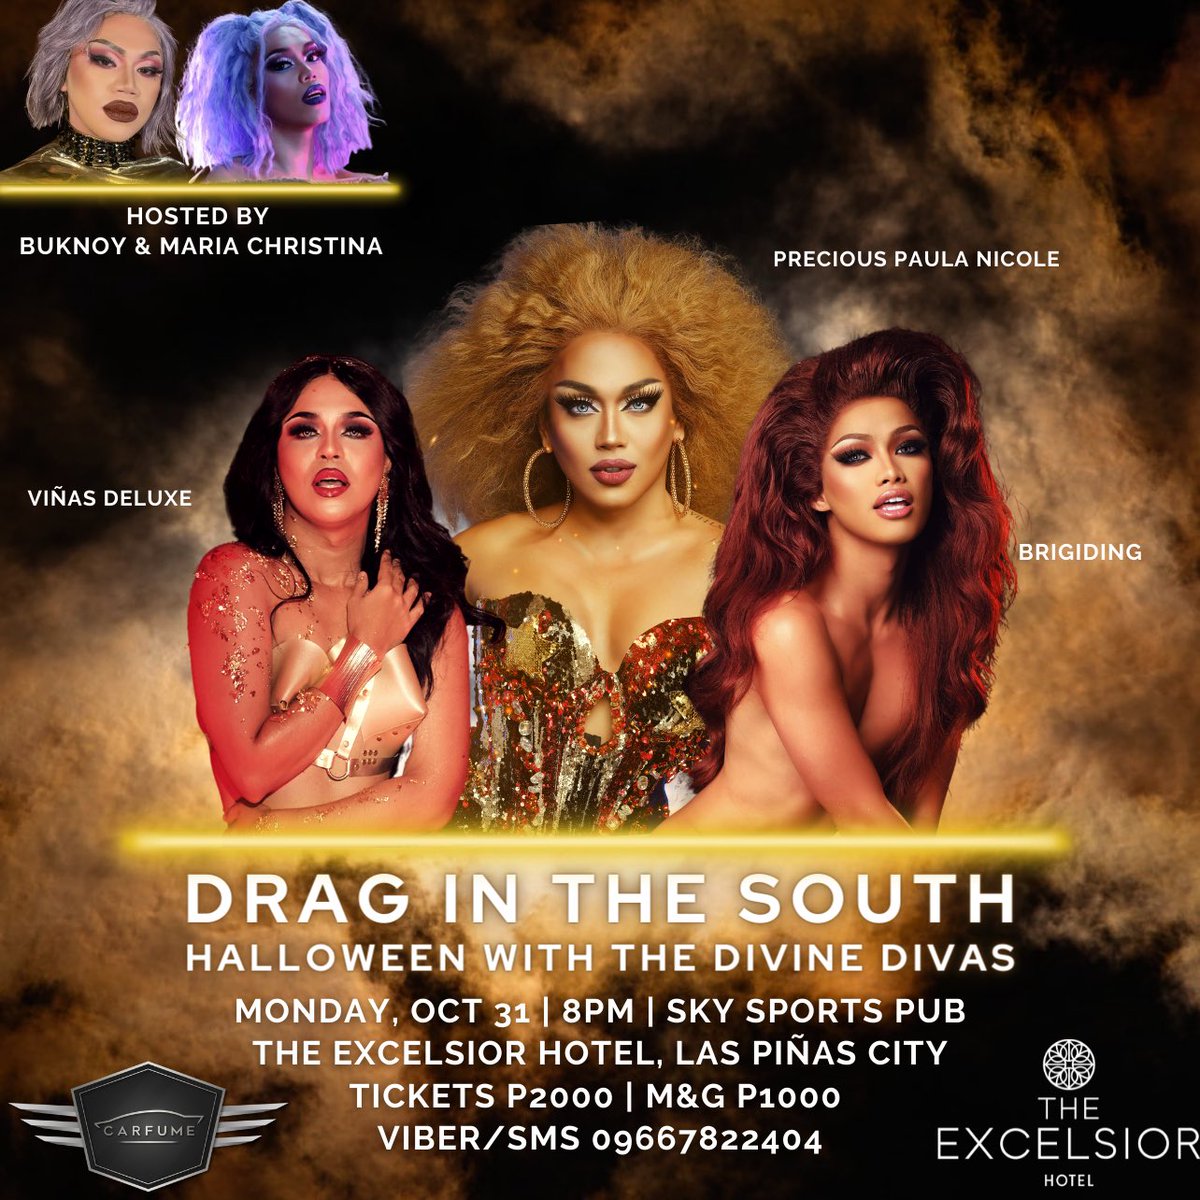 HALLOWEEN PARTY WITH THE DIVINE DIVAS! 🎃
Catch @PreciousPaulaN @VinasDeluxe & @brigiding live! 💋
Best costume wins a prize! 🏆

Viber 09667822404 or IG DM draginthesouth for tickets!
Mon, Oct 31, 8PM (doors open 6:30PM)
Sky Sports Pub, Excelsior Hotel, Las Piñas 💯